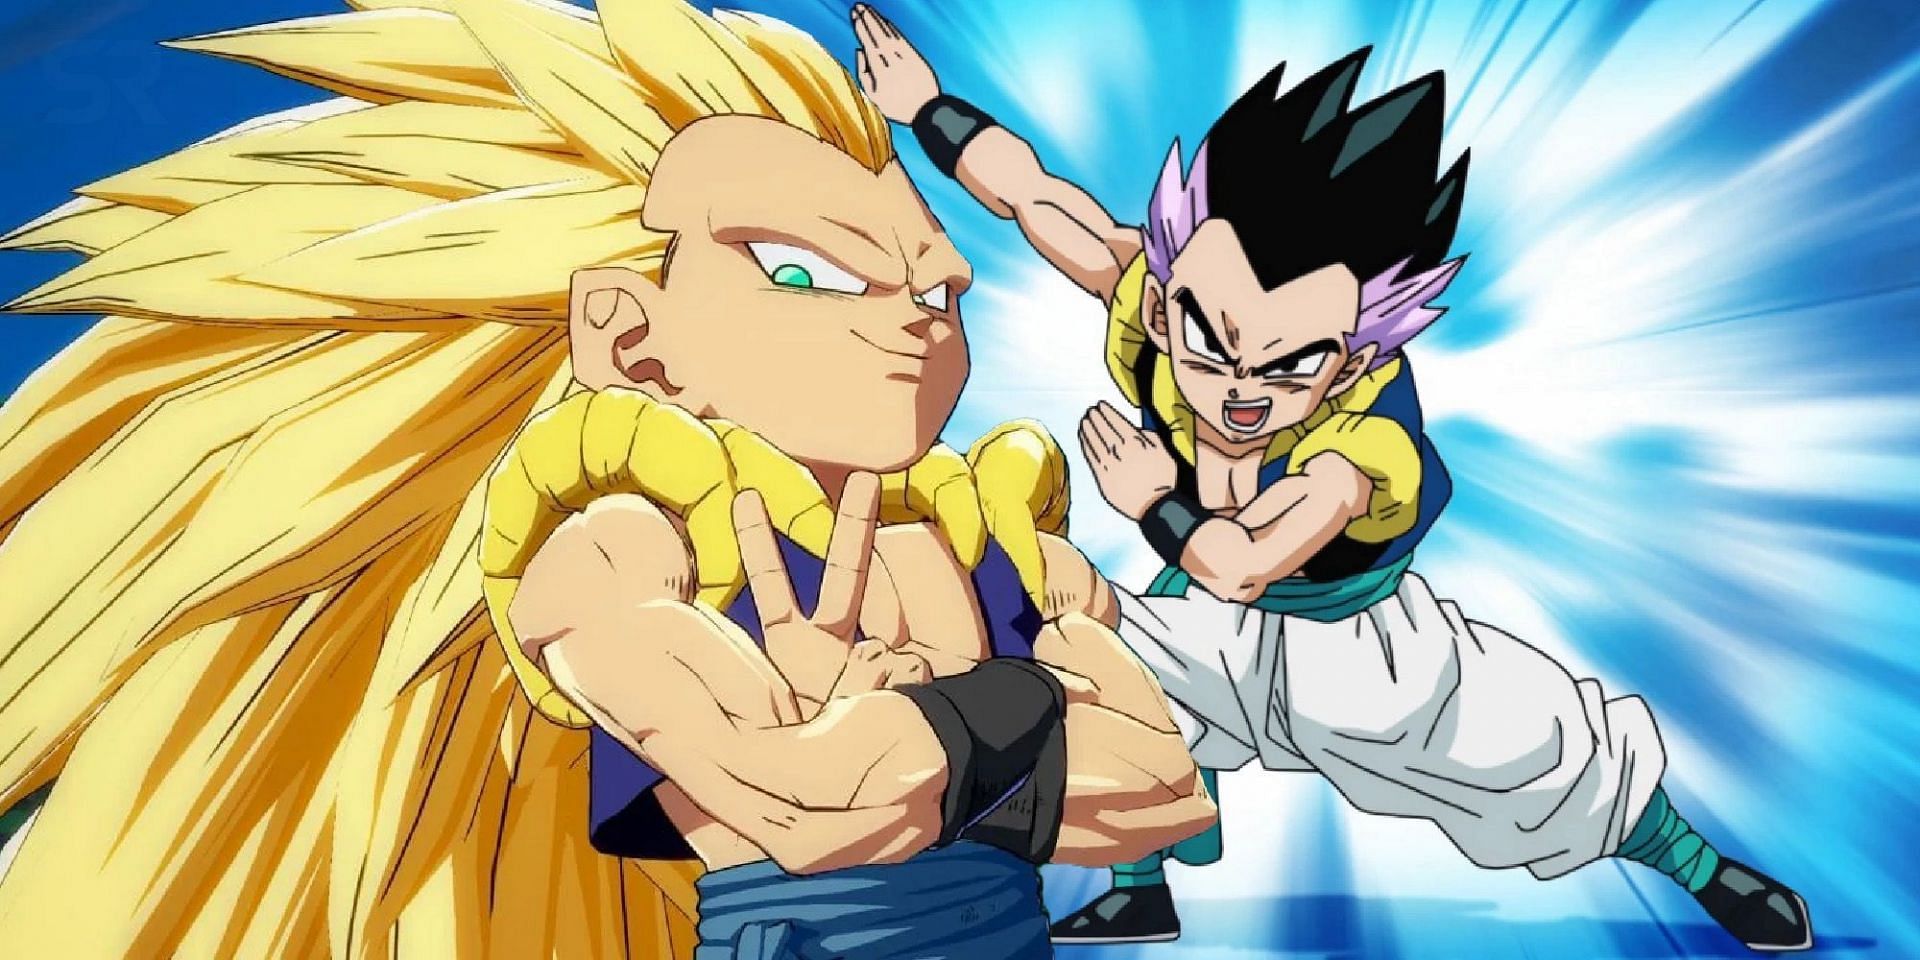 Gotenks as he appears in the anime (Image via Toei Animation)